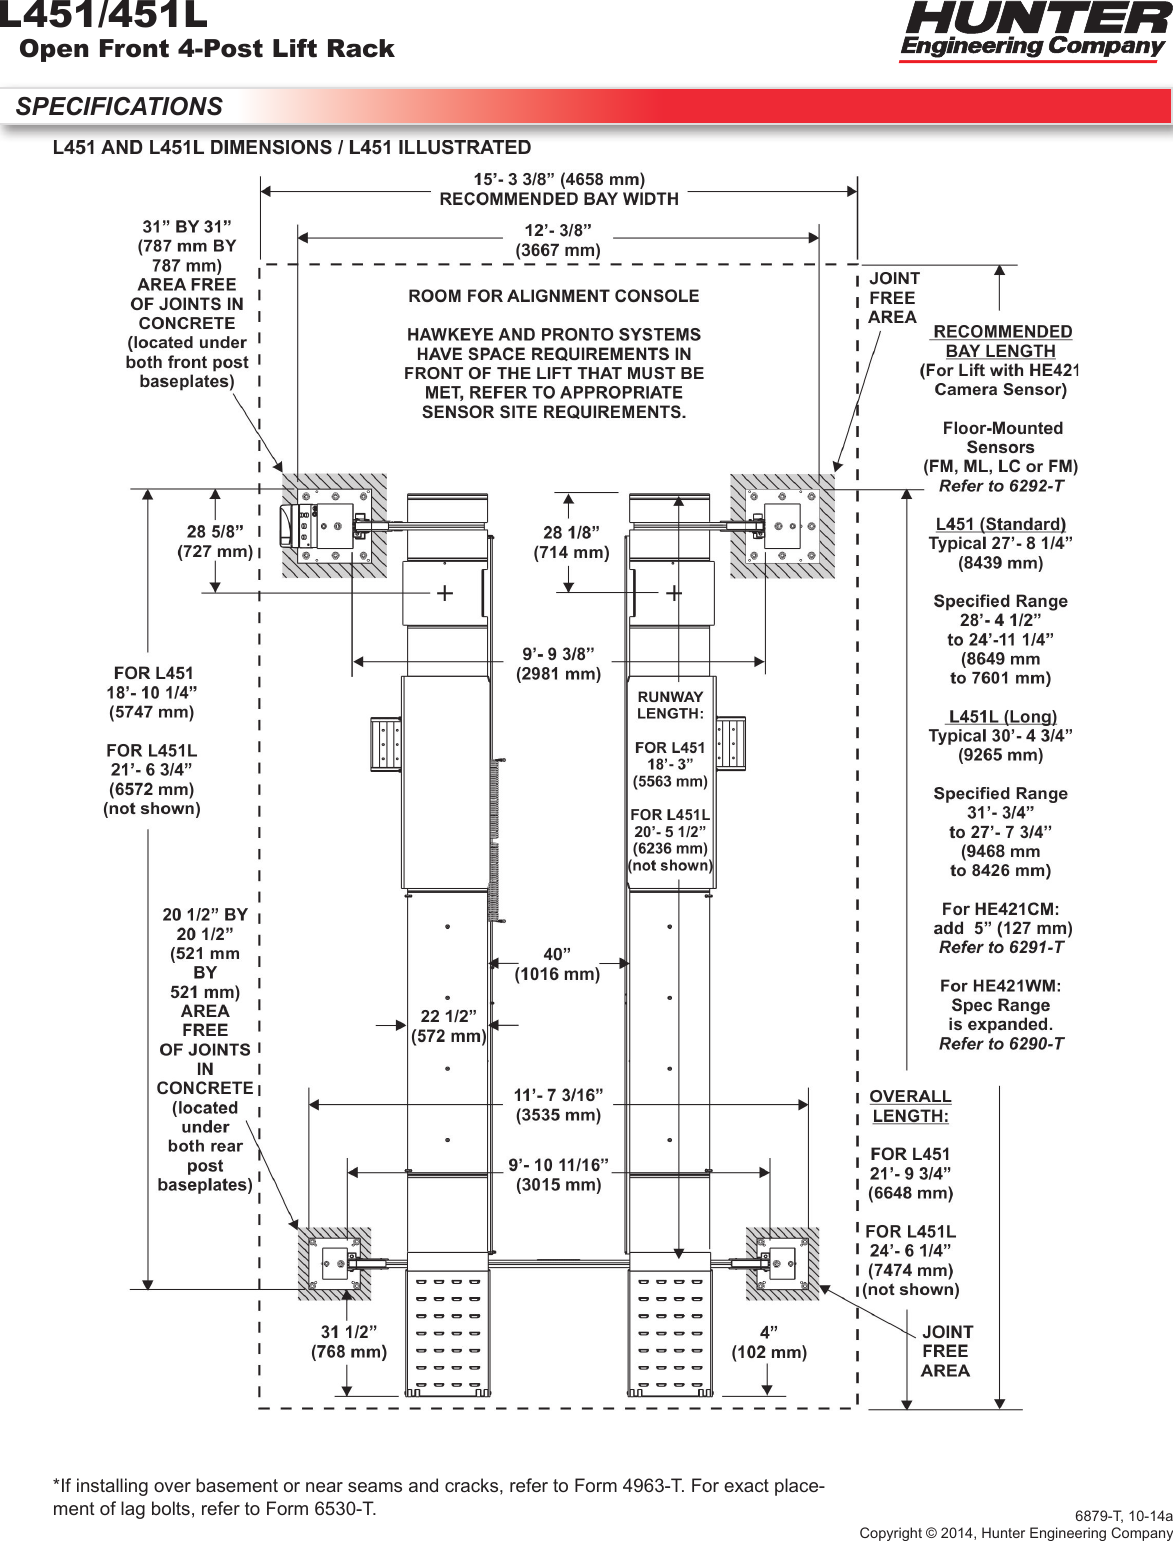 Page 2 of 2 - Hunter-Engineering Hunter-Engineering-6879-T-Specification-Sheet- L451/451L Open Front 4-Post Lift Rack Spec Sheet  Hunter-engineering-6879-t-specification-sheet